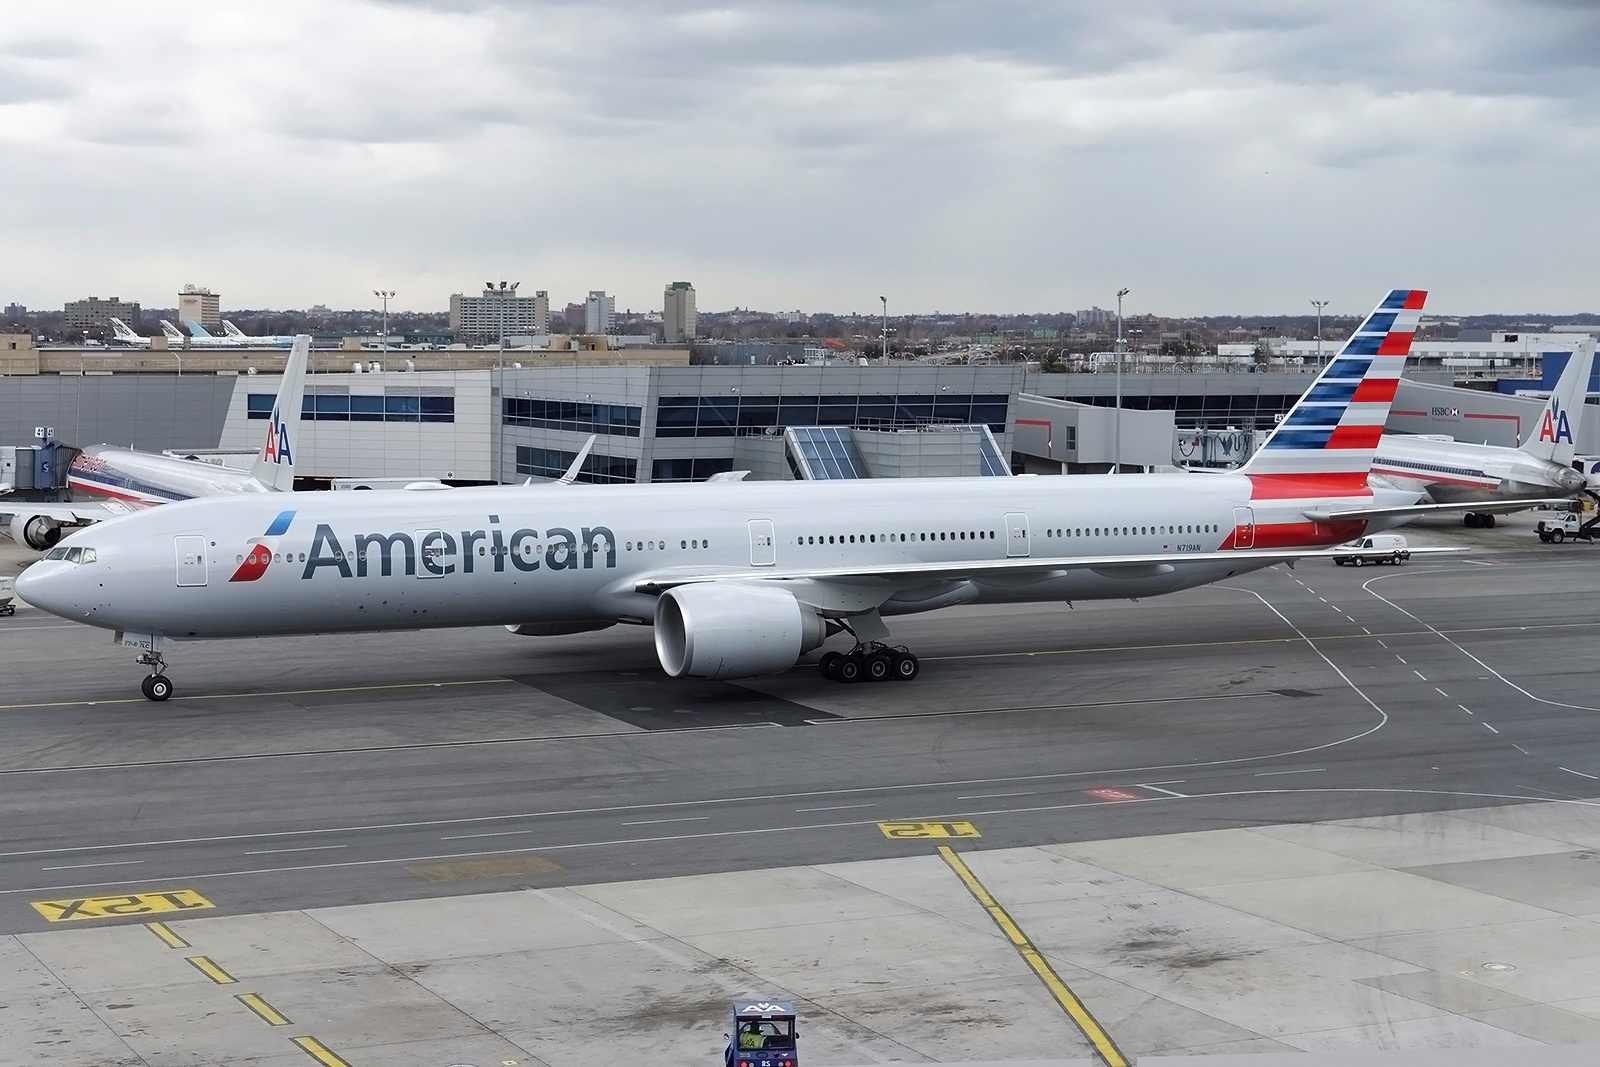 Boeing 777-300ER of American Airlines at Dallas Forth Worth AircraftWallpaper 4008 | Aircraft ...